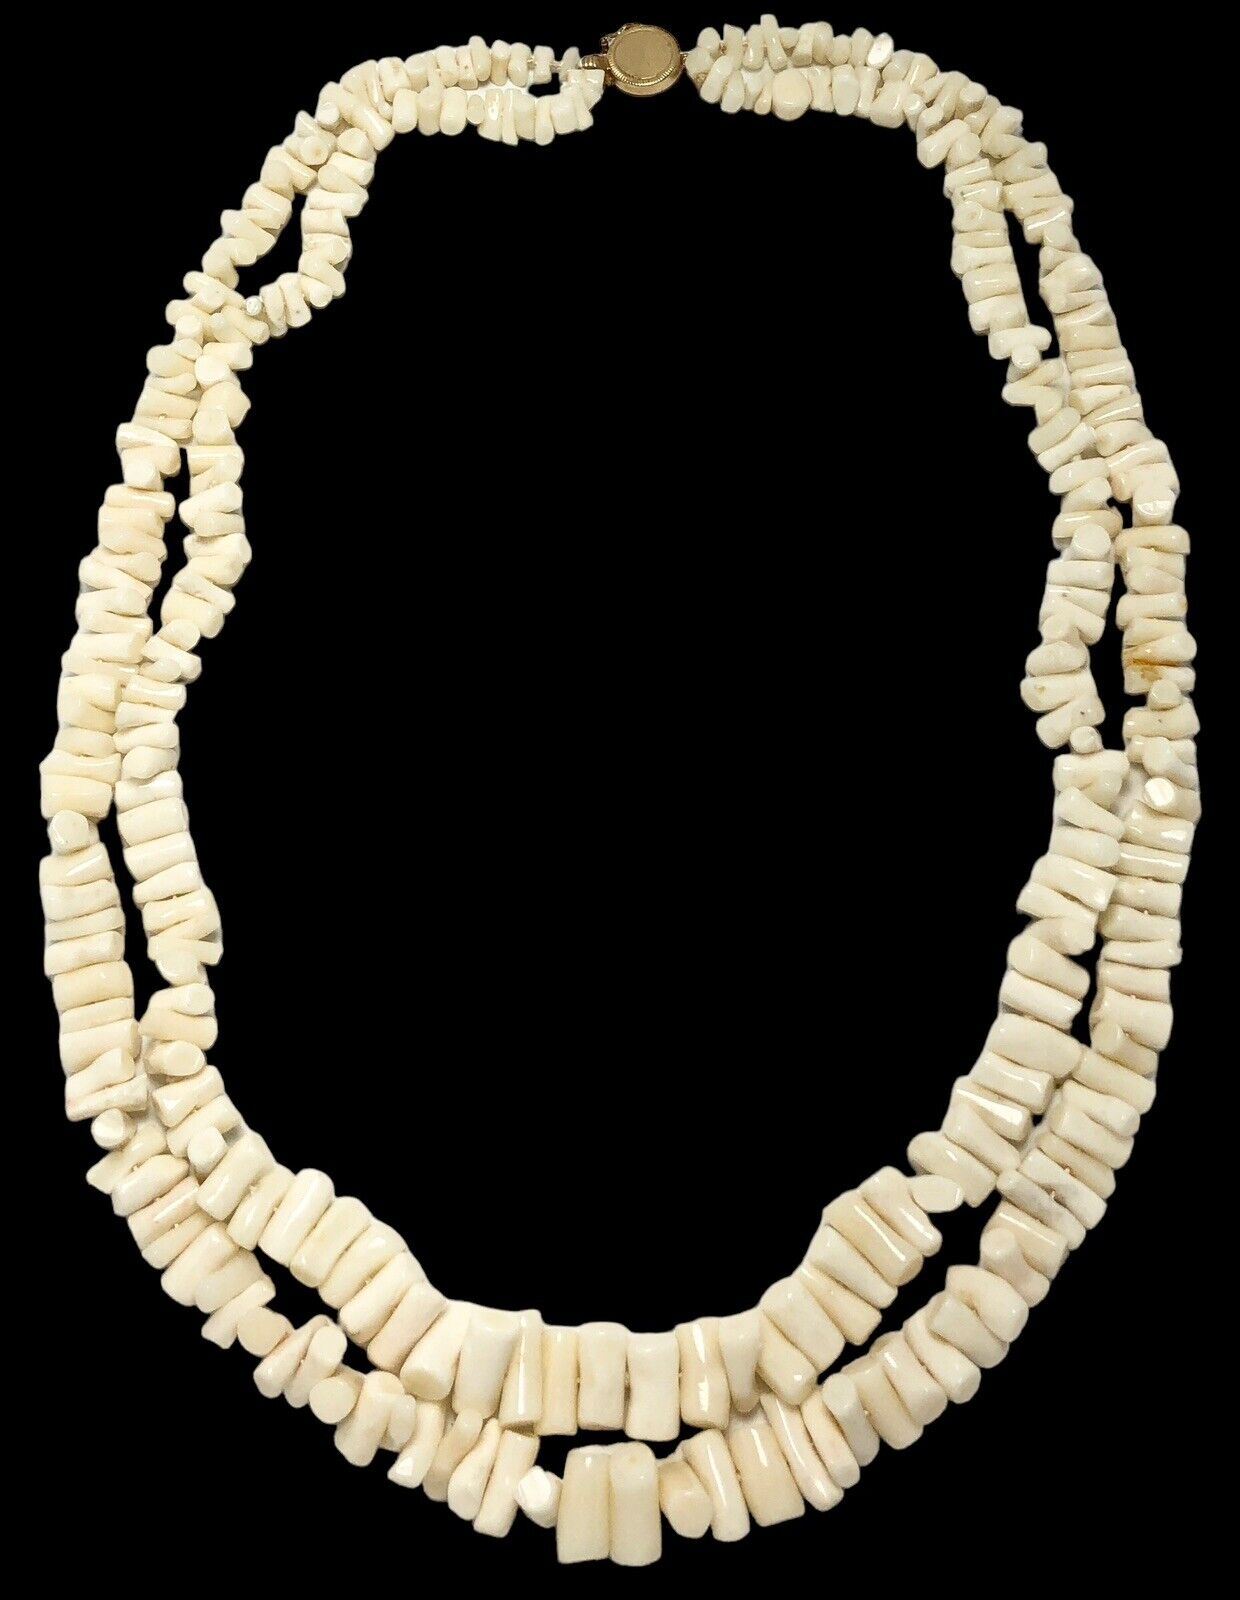 14k Gold Clasp Vintage Double Strand Graduated Cream White Coral Necklace 21”